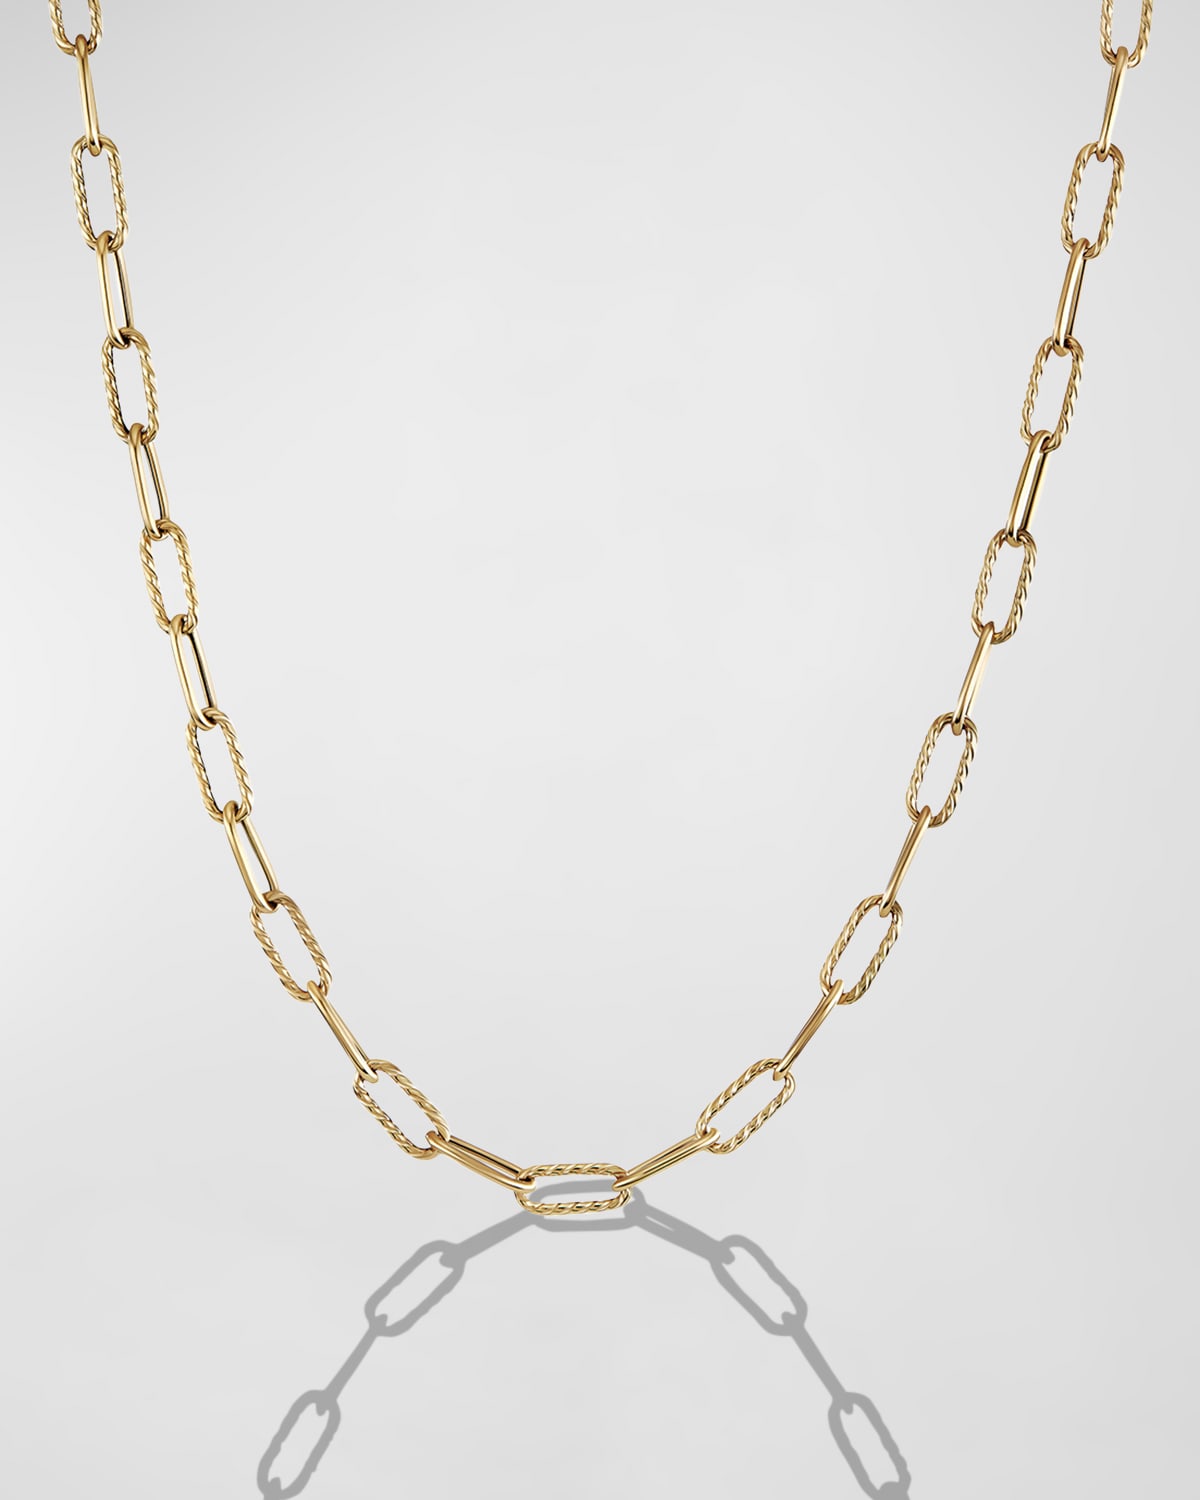 DAVID YURMAN DY MADISON CHAIN NECKLACE IN 18K GOLD, 4MM, 18"L